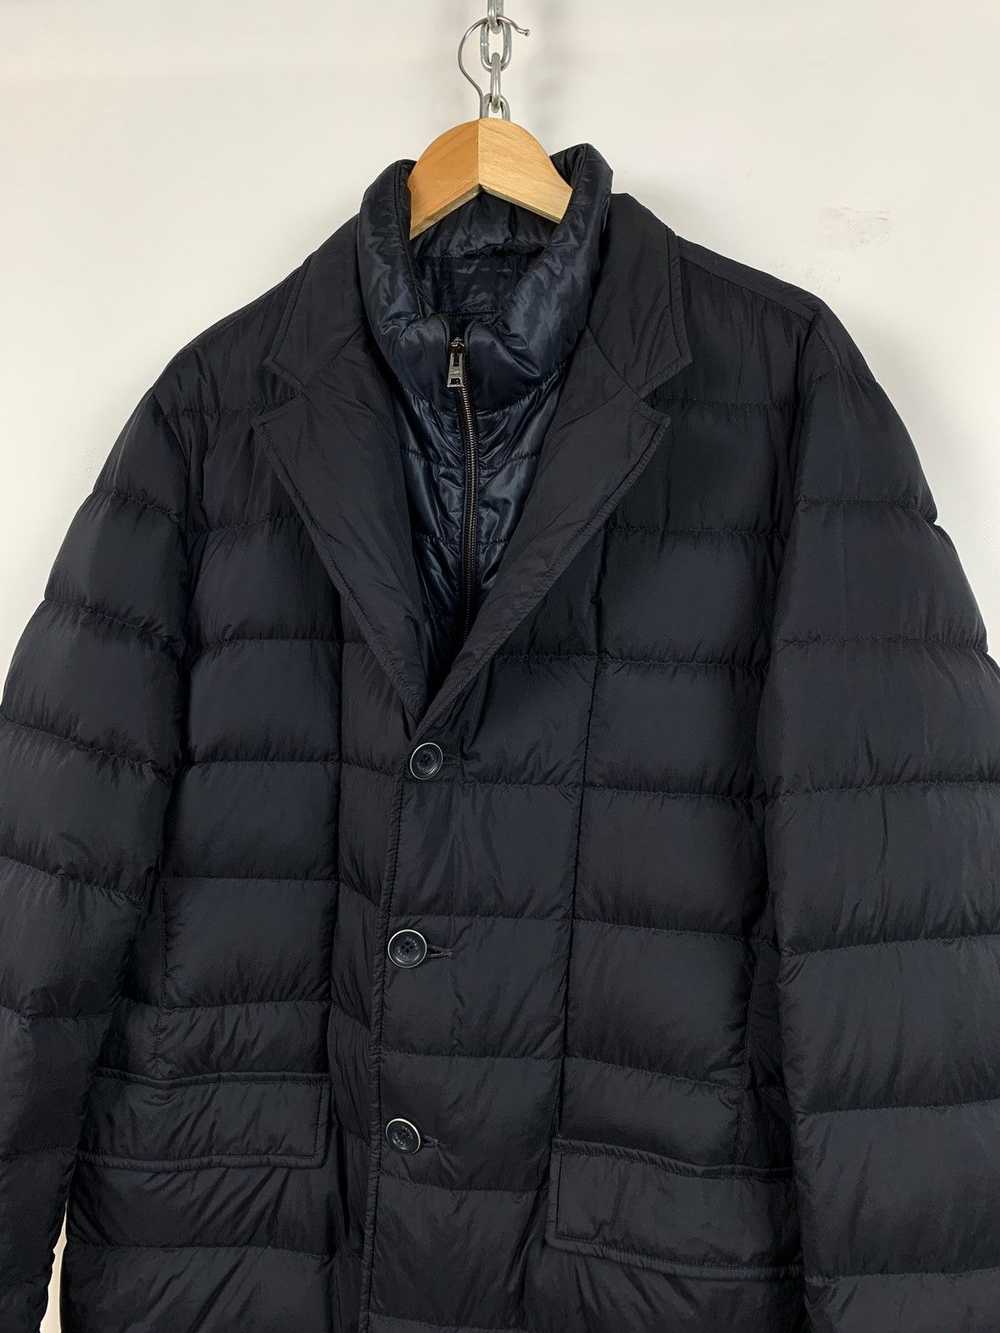 Herno Herno Navy Blue Quilted Down Jacket - image 8